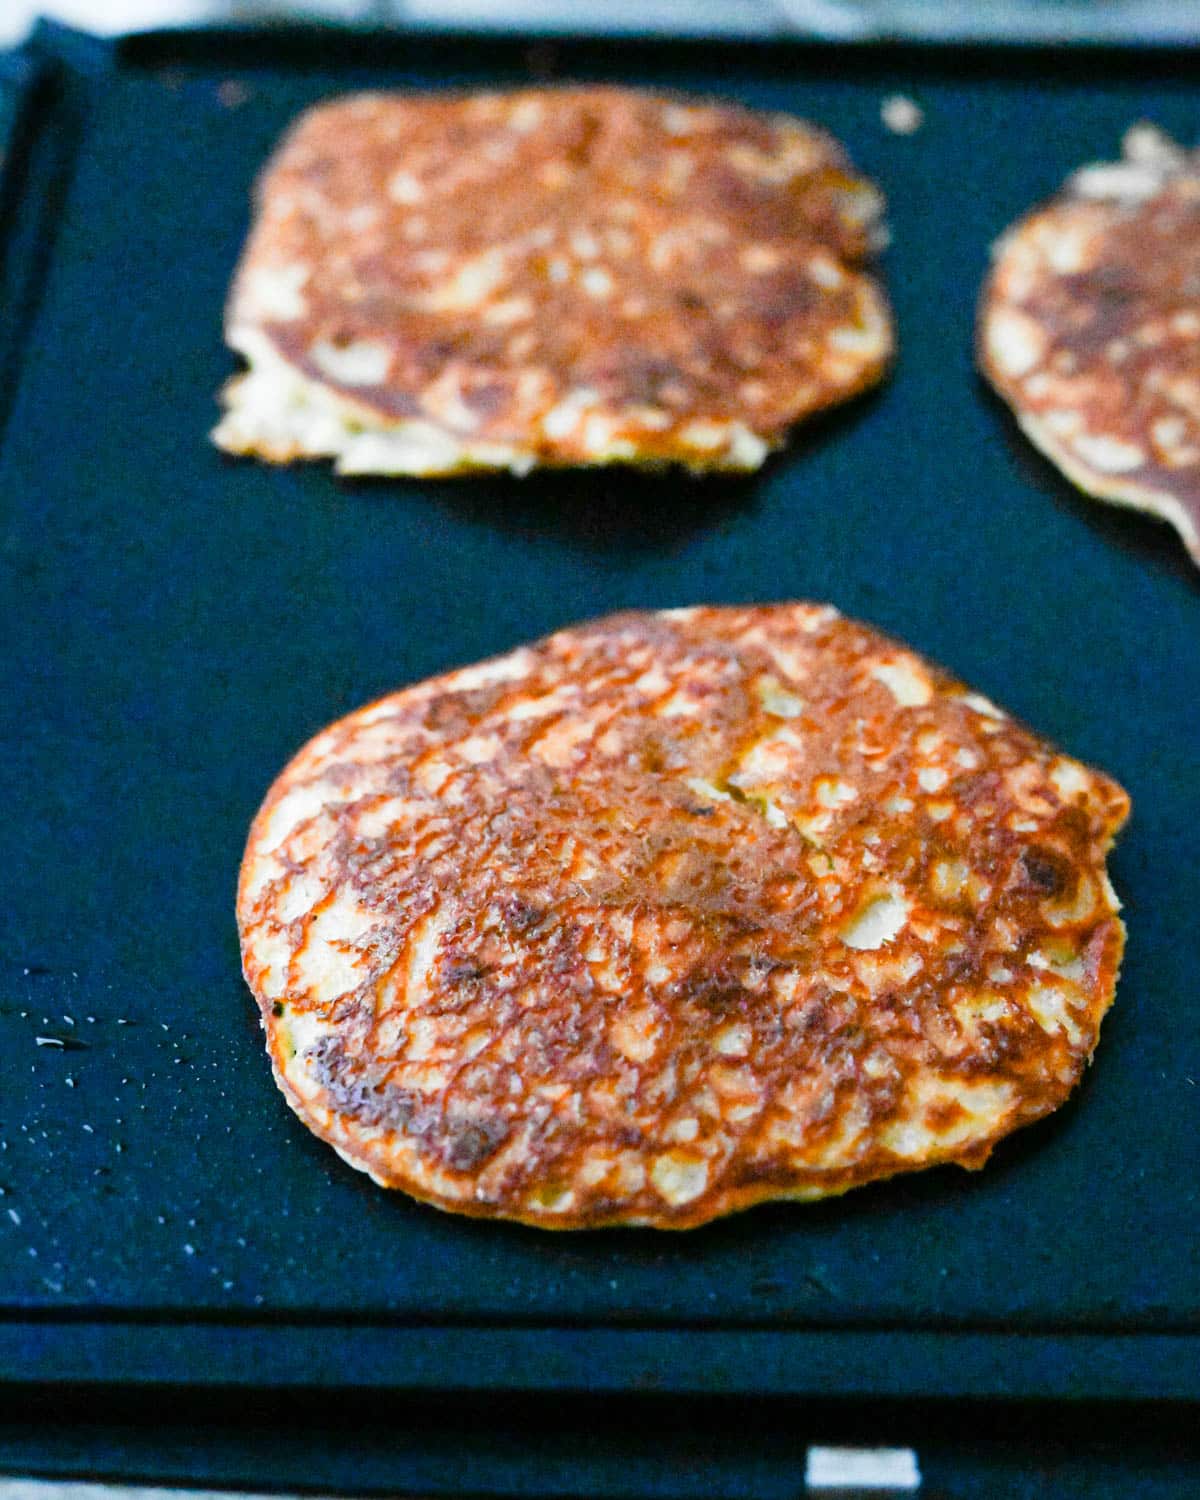 The banana pancakes after flipping.